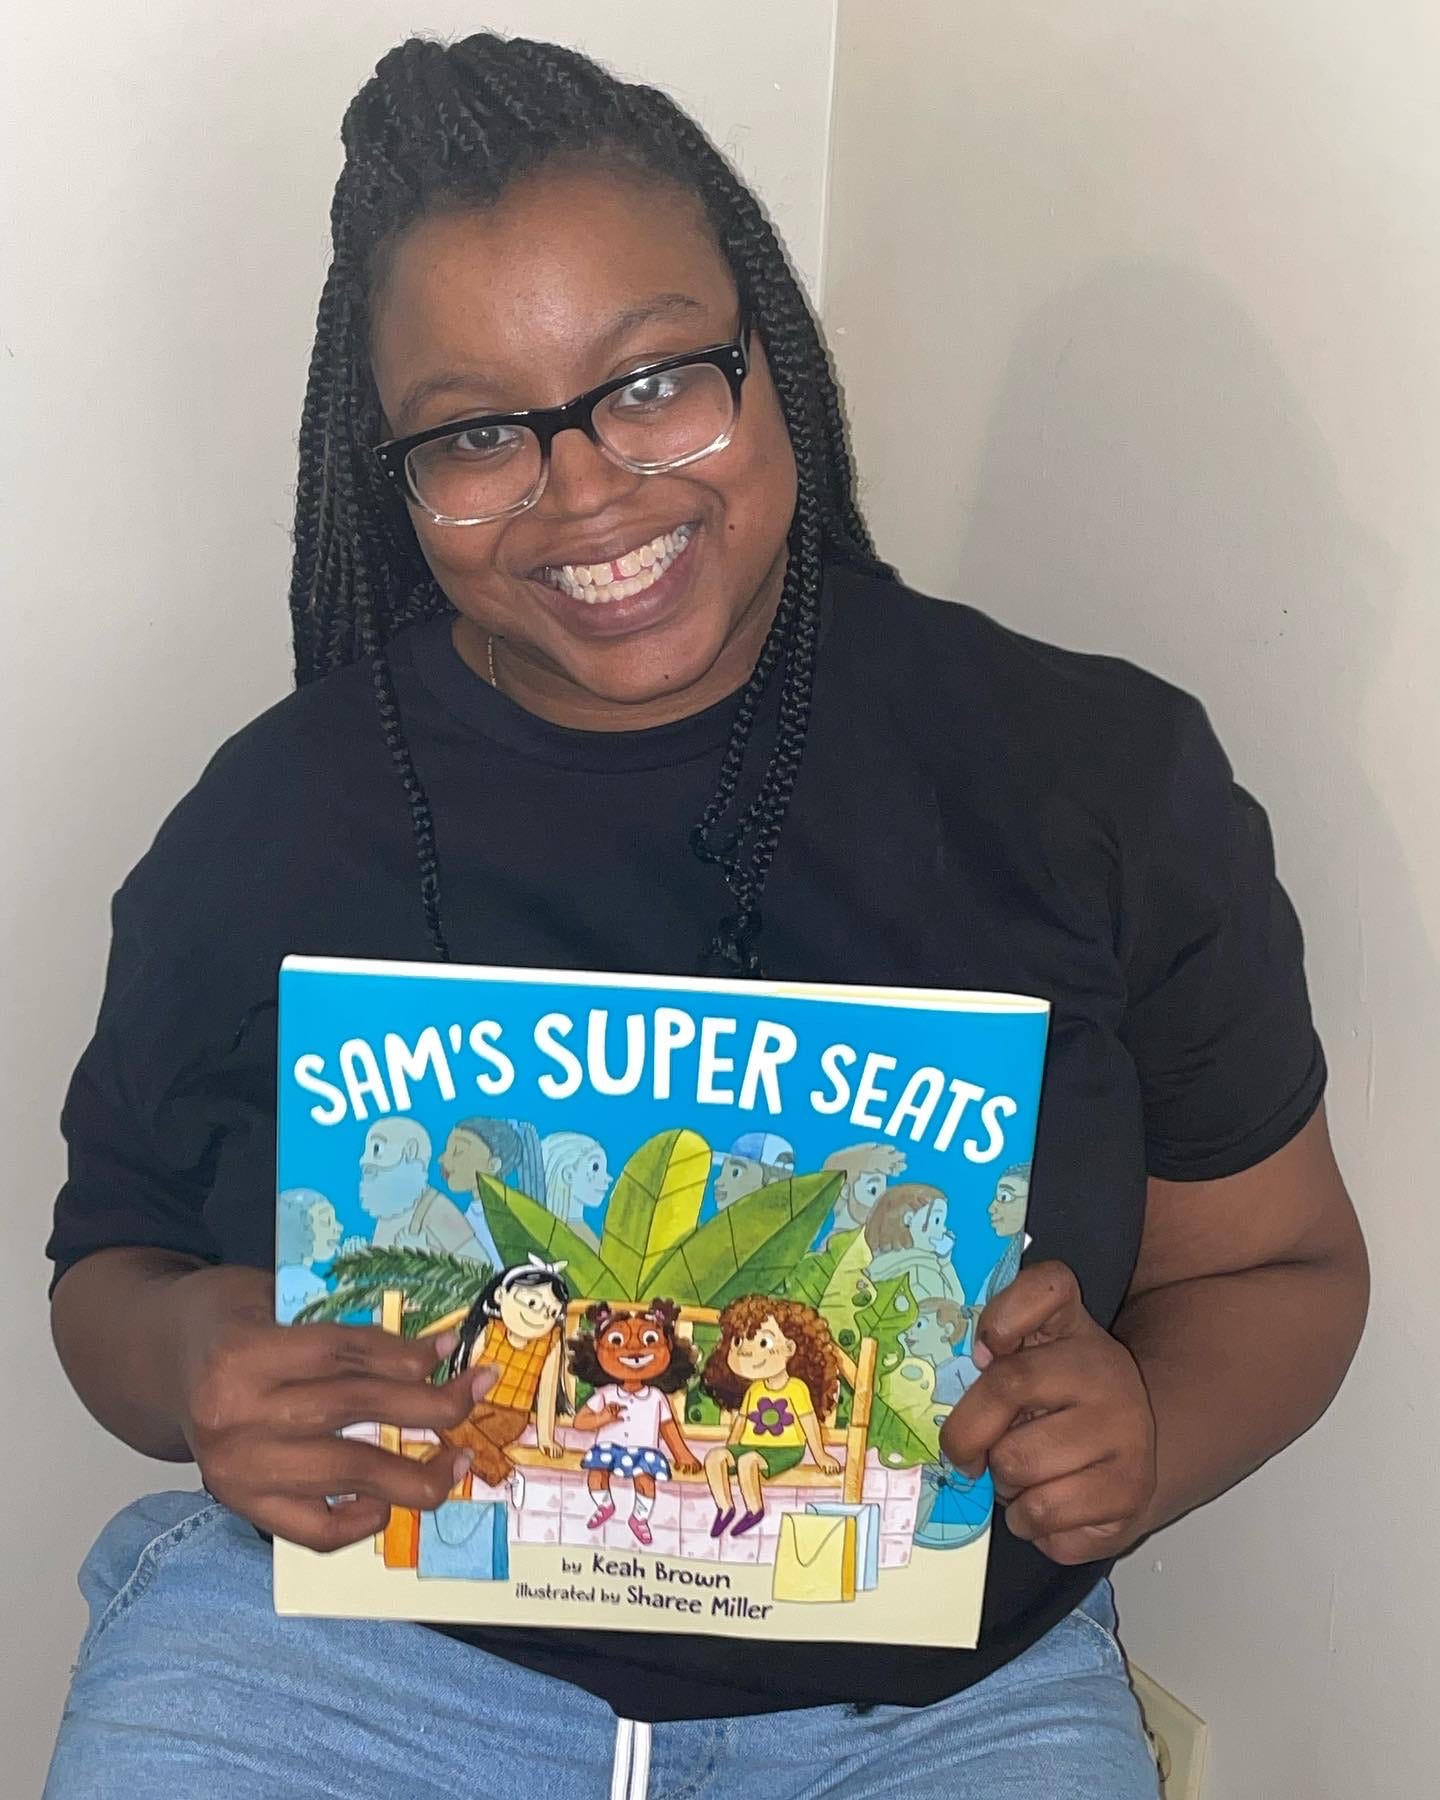 Keah smiles at the camera wearing black and white glasses. Her braided hair is  up in a ponytail and she is wearing a black shirt and blue Jean shorts. She is holding the physical copy of Sam’s Super Seats in her hands.